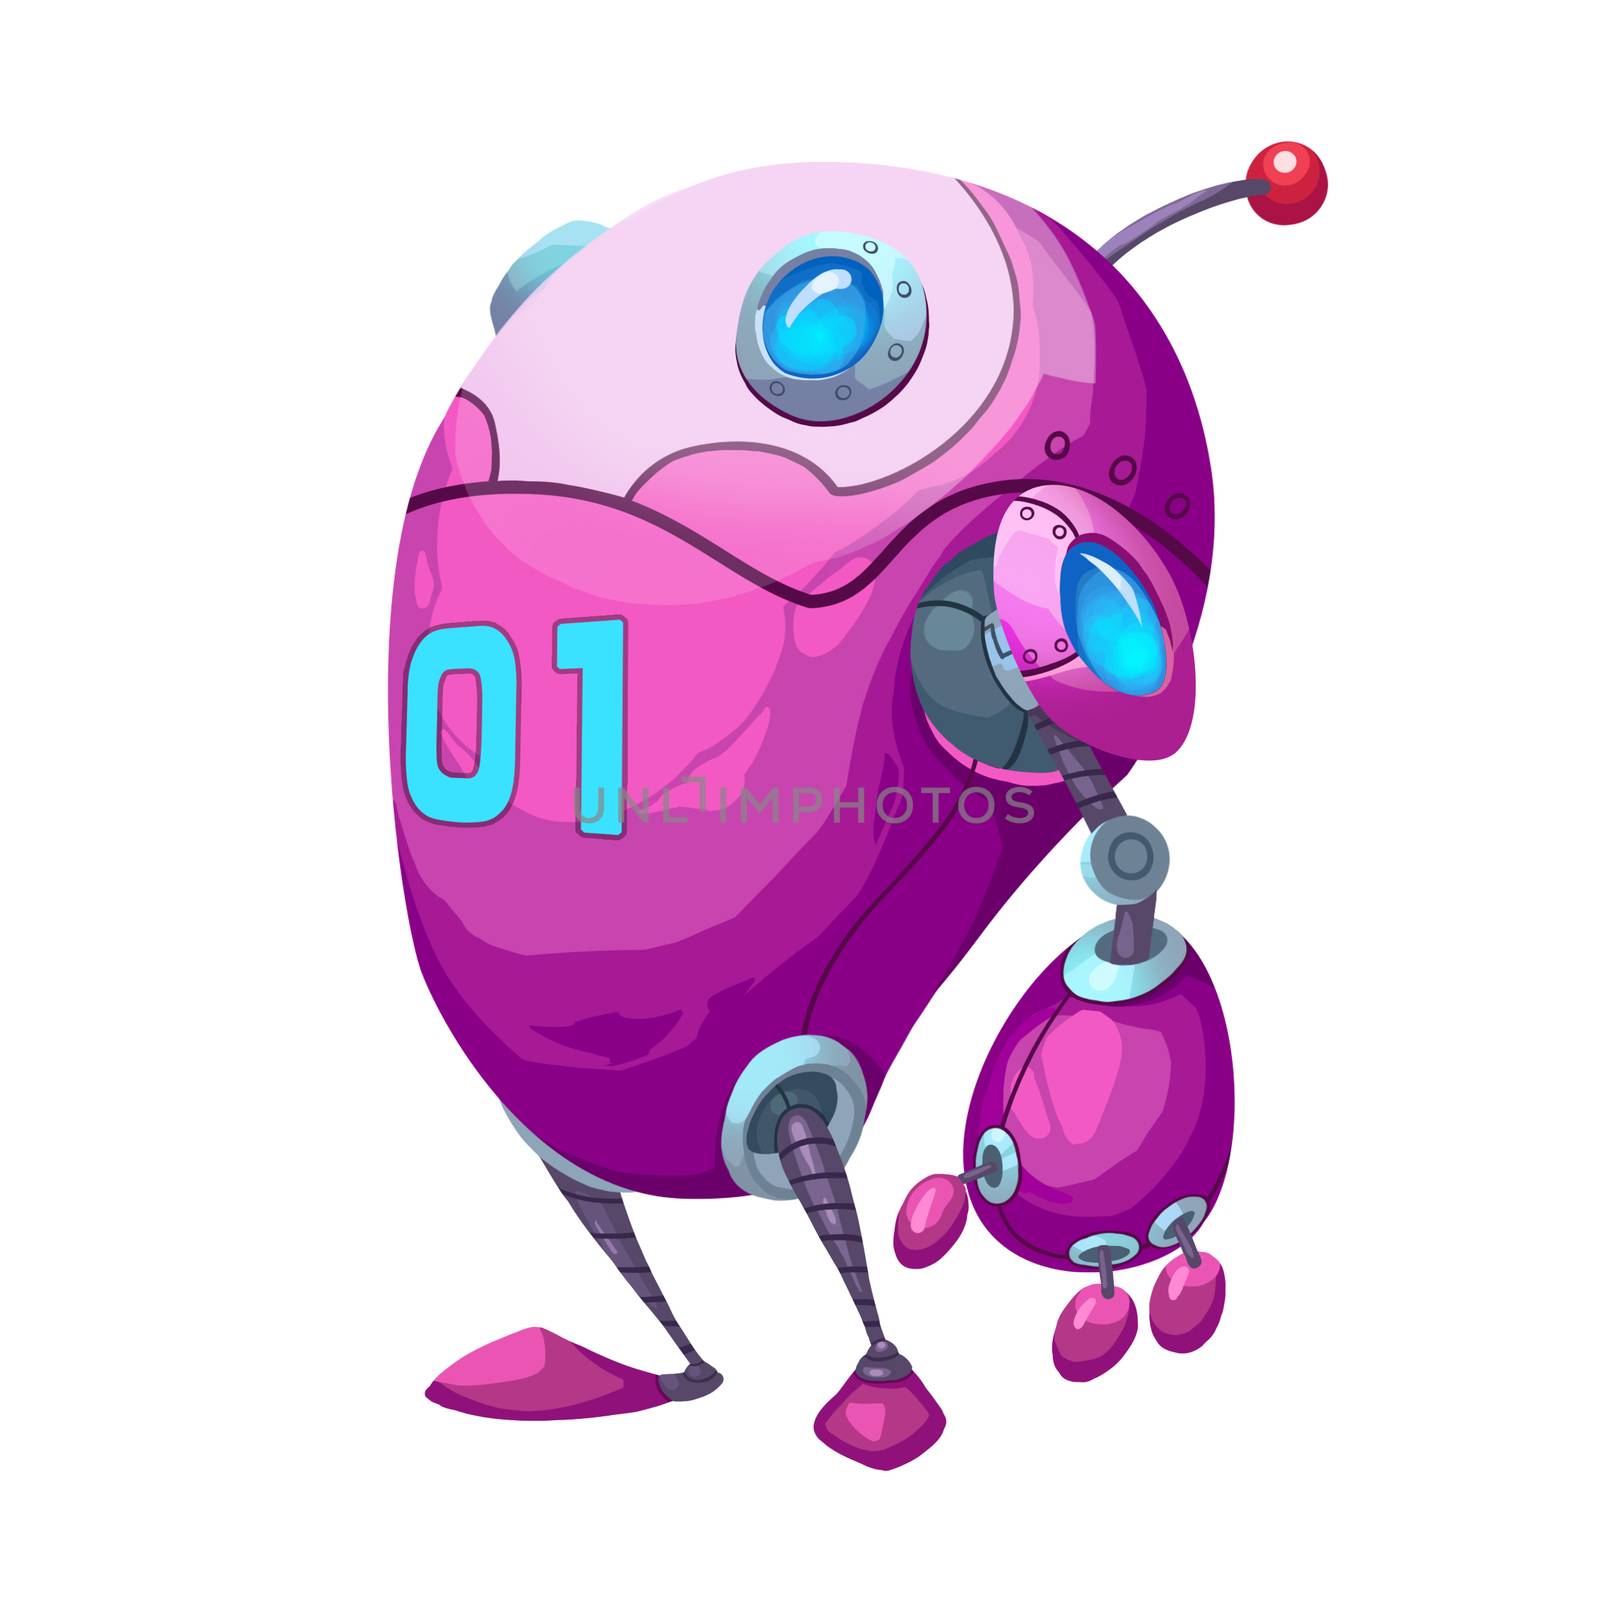 Illustration: The Sport Robot of Jumping Named "Pink Capsule". Element / Character Design. Crazy and Fantasy Future World Topic. Realistic / Cartoon / Fantastic / Sci-fi Style by NextMars